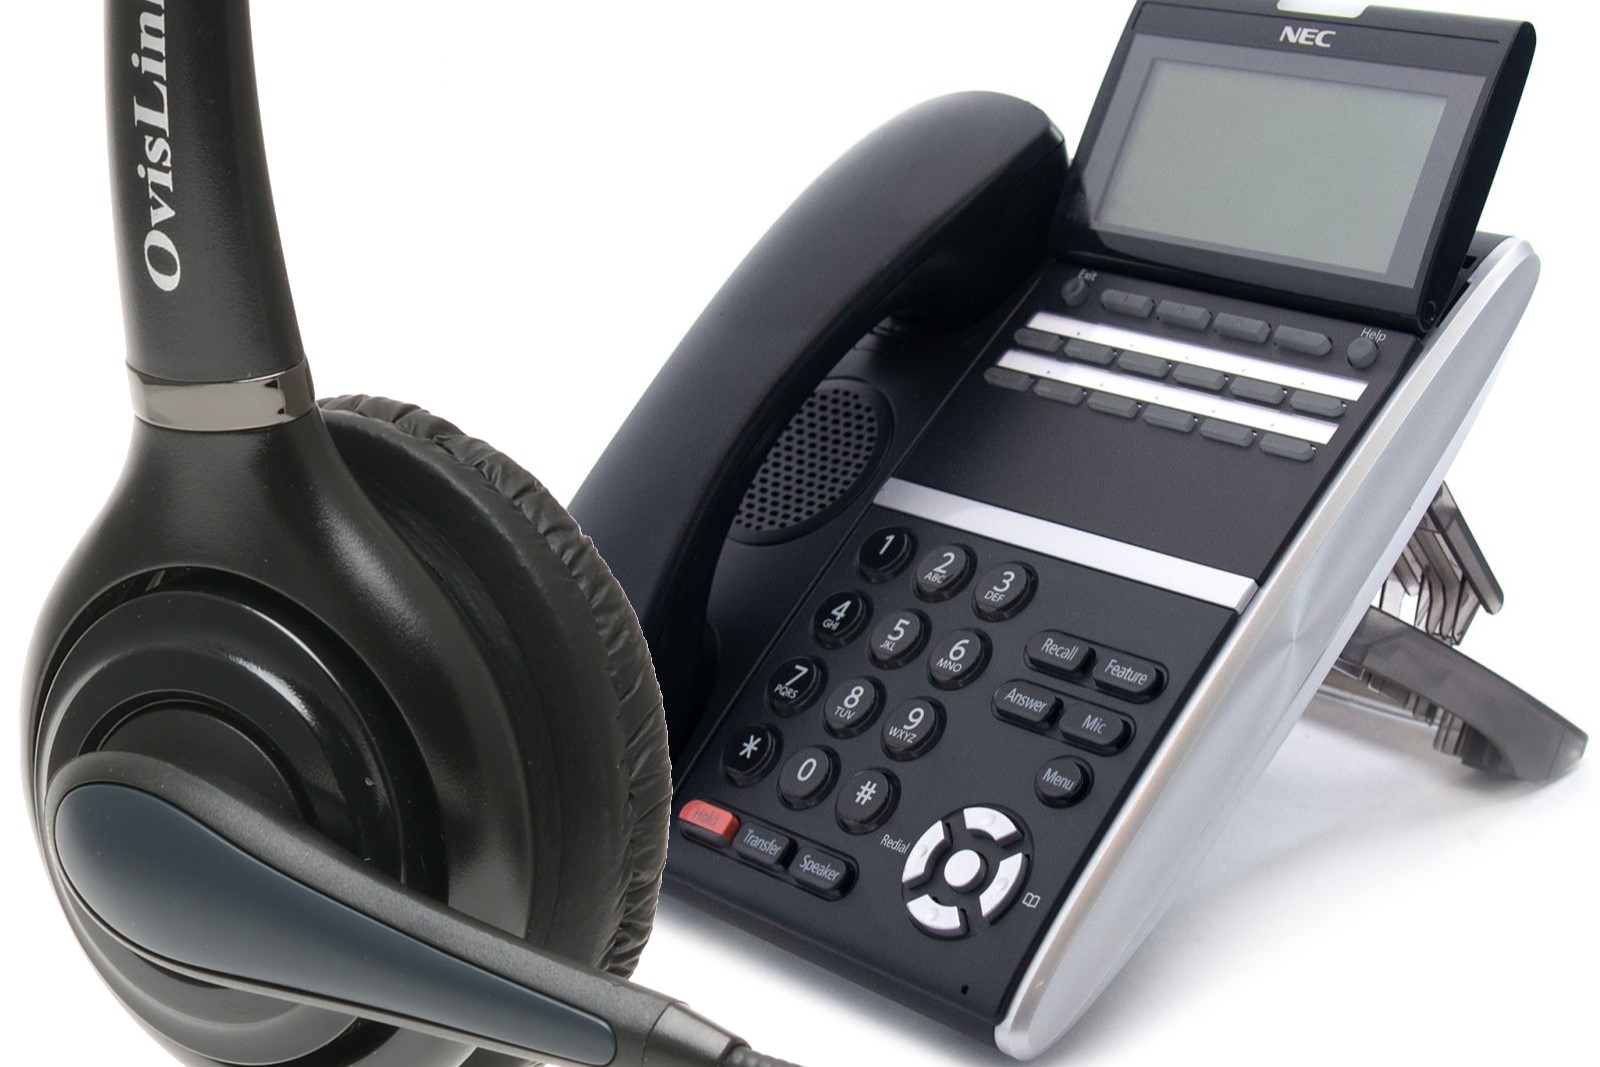 Pairing A Headset With Avaya Phones: A Step-by-Step Guide